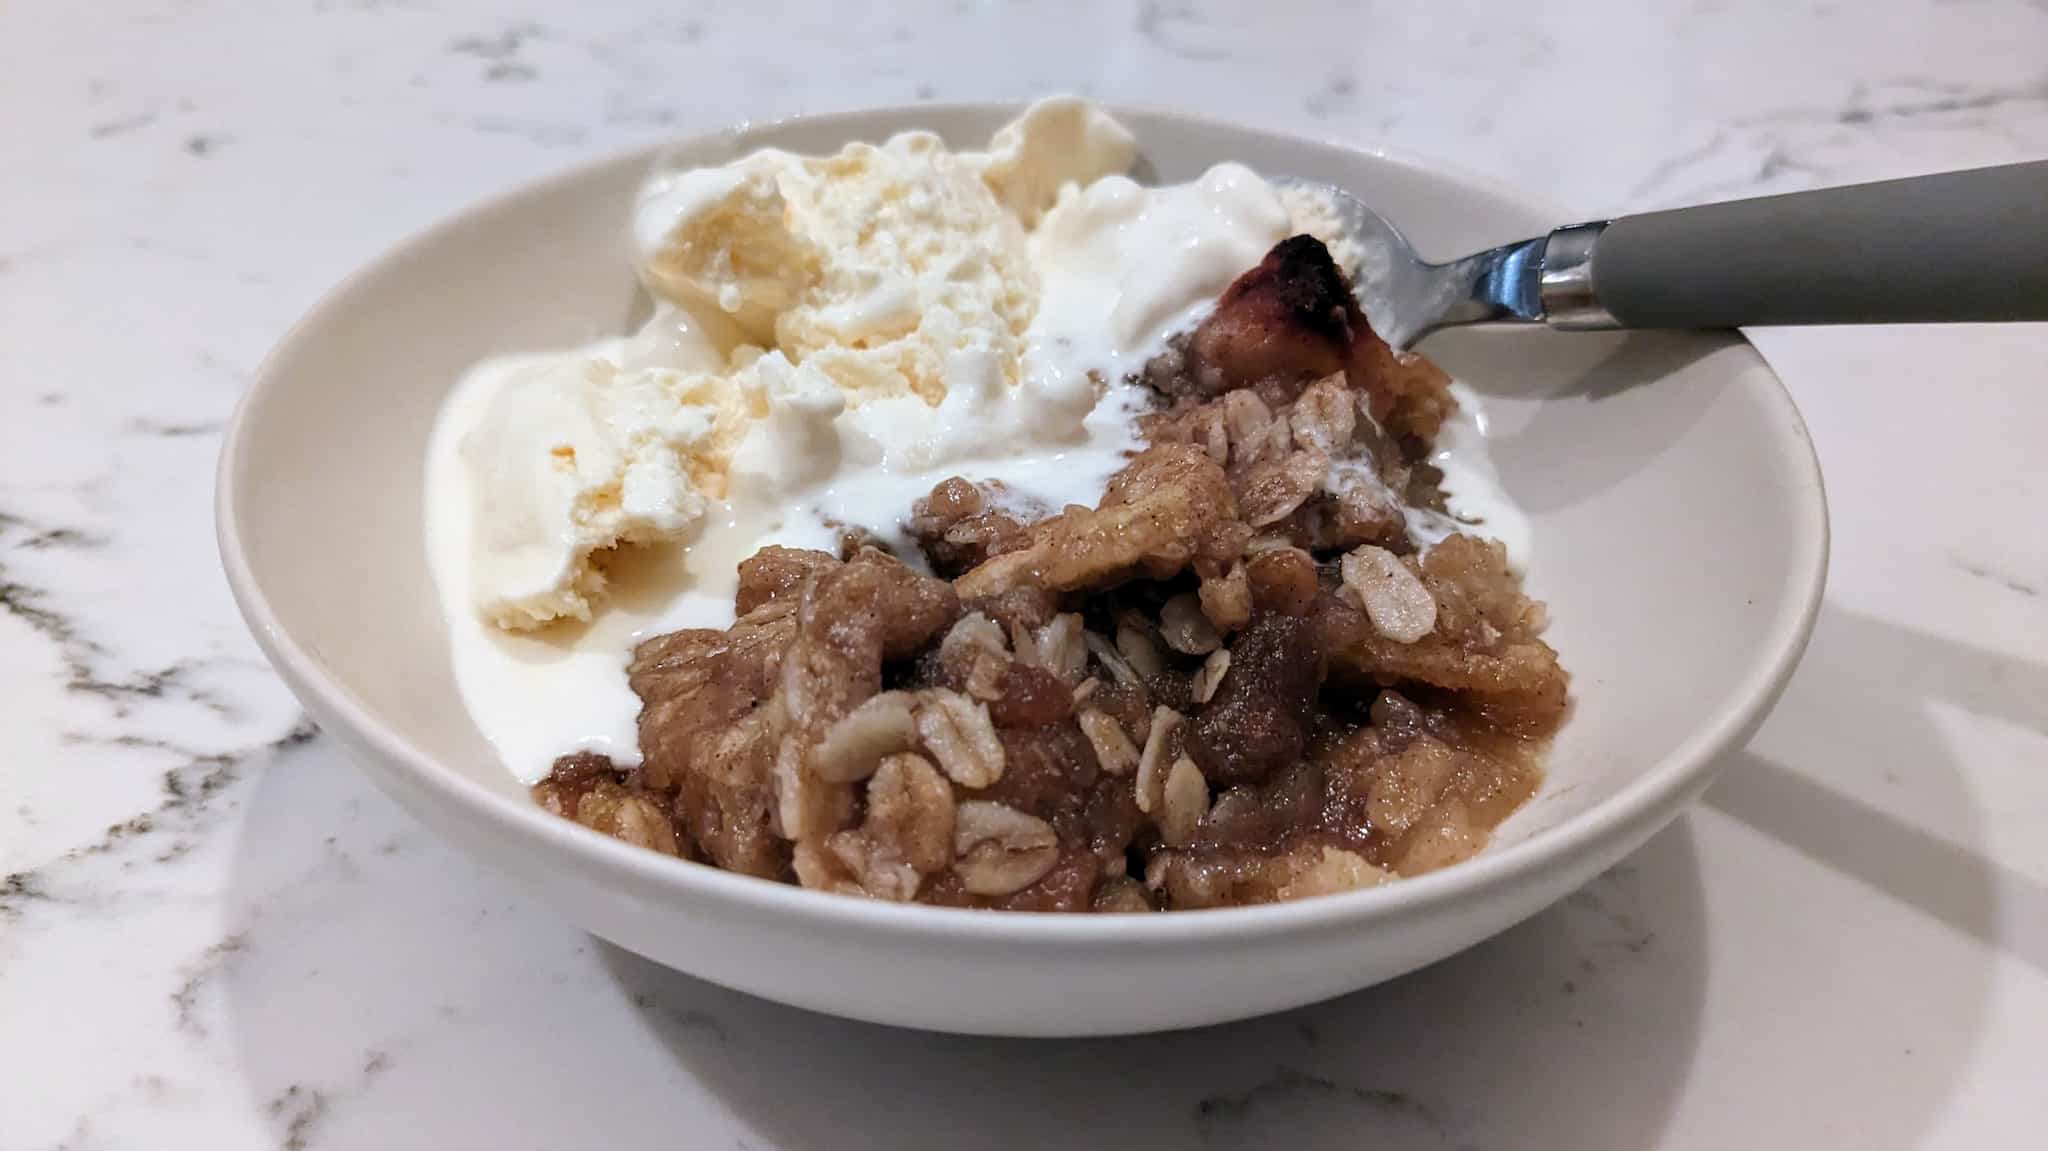 Bowl of oats and apples topped with vanilla ice cream.